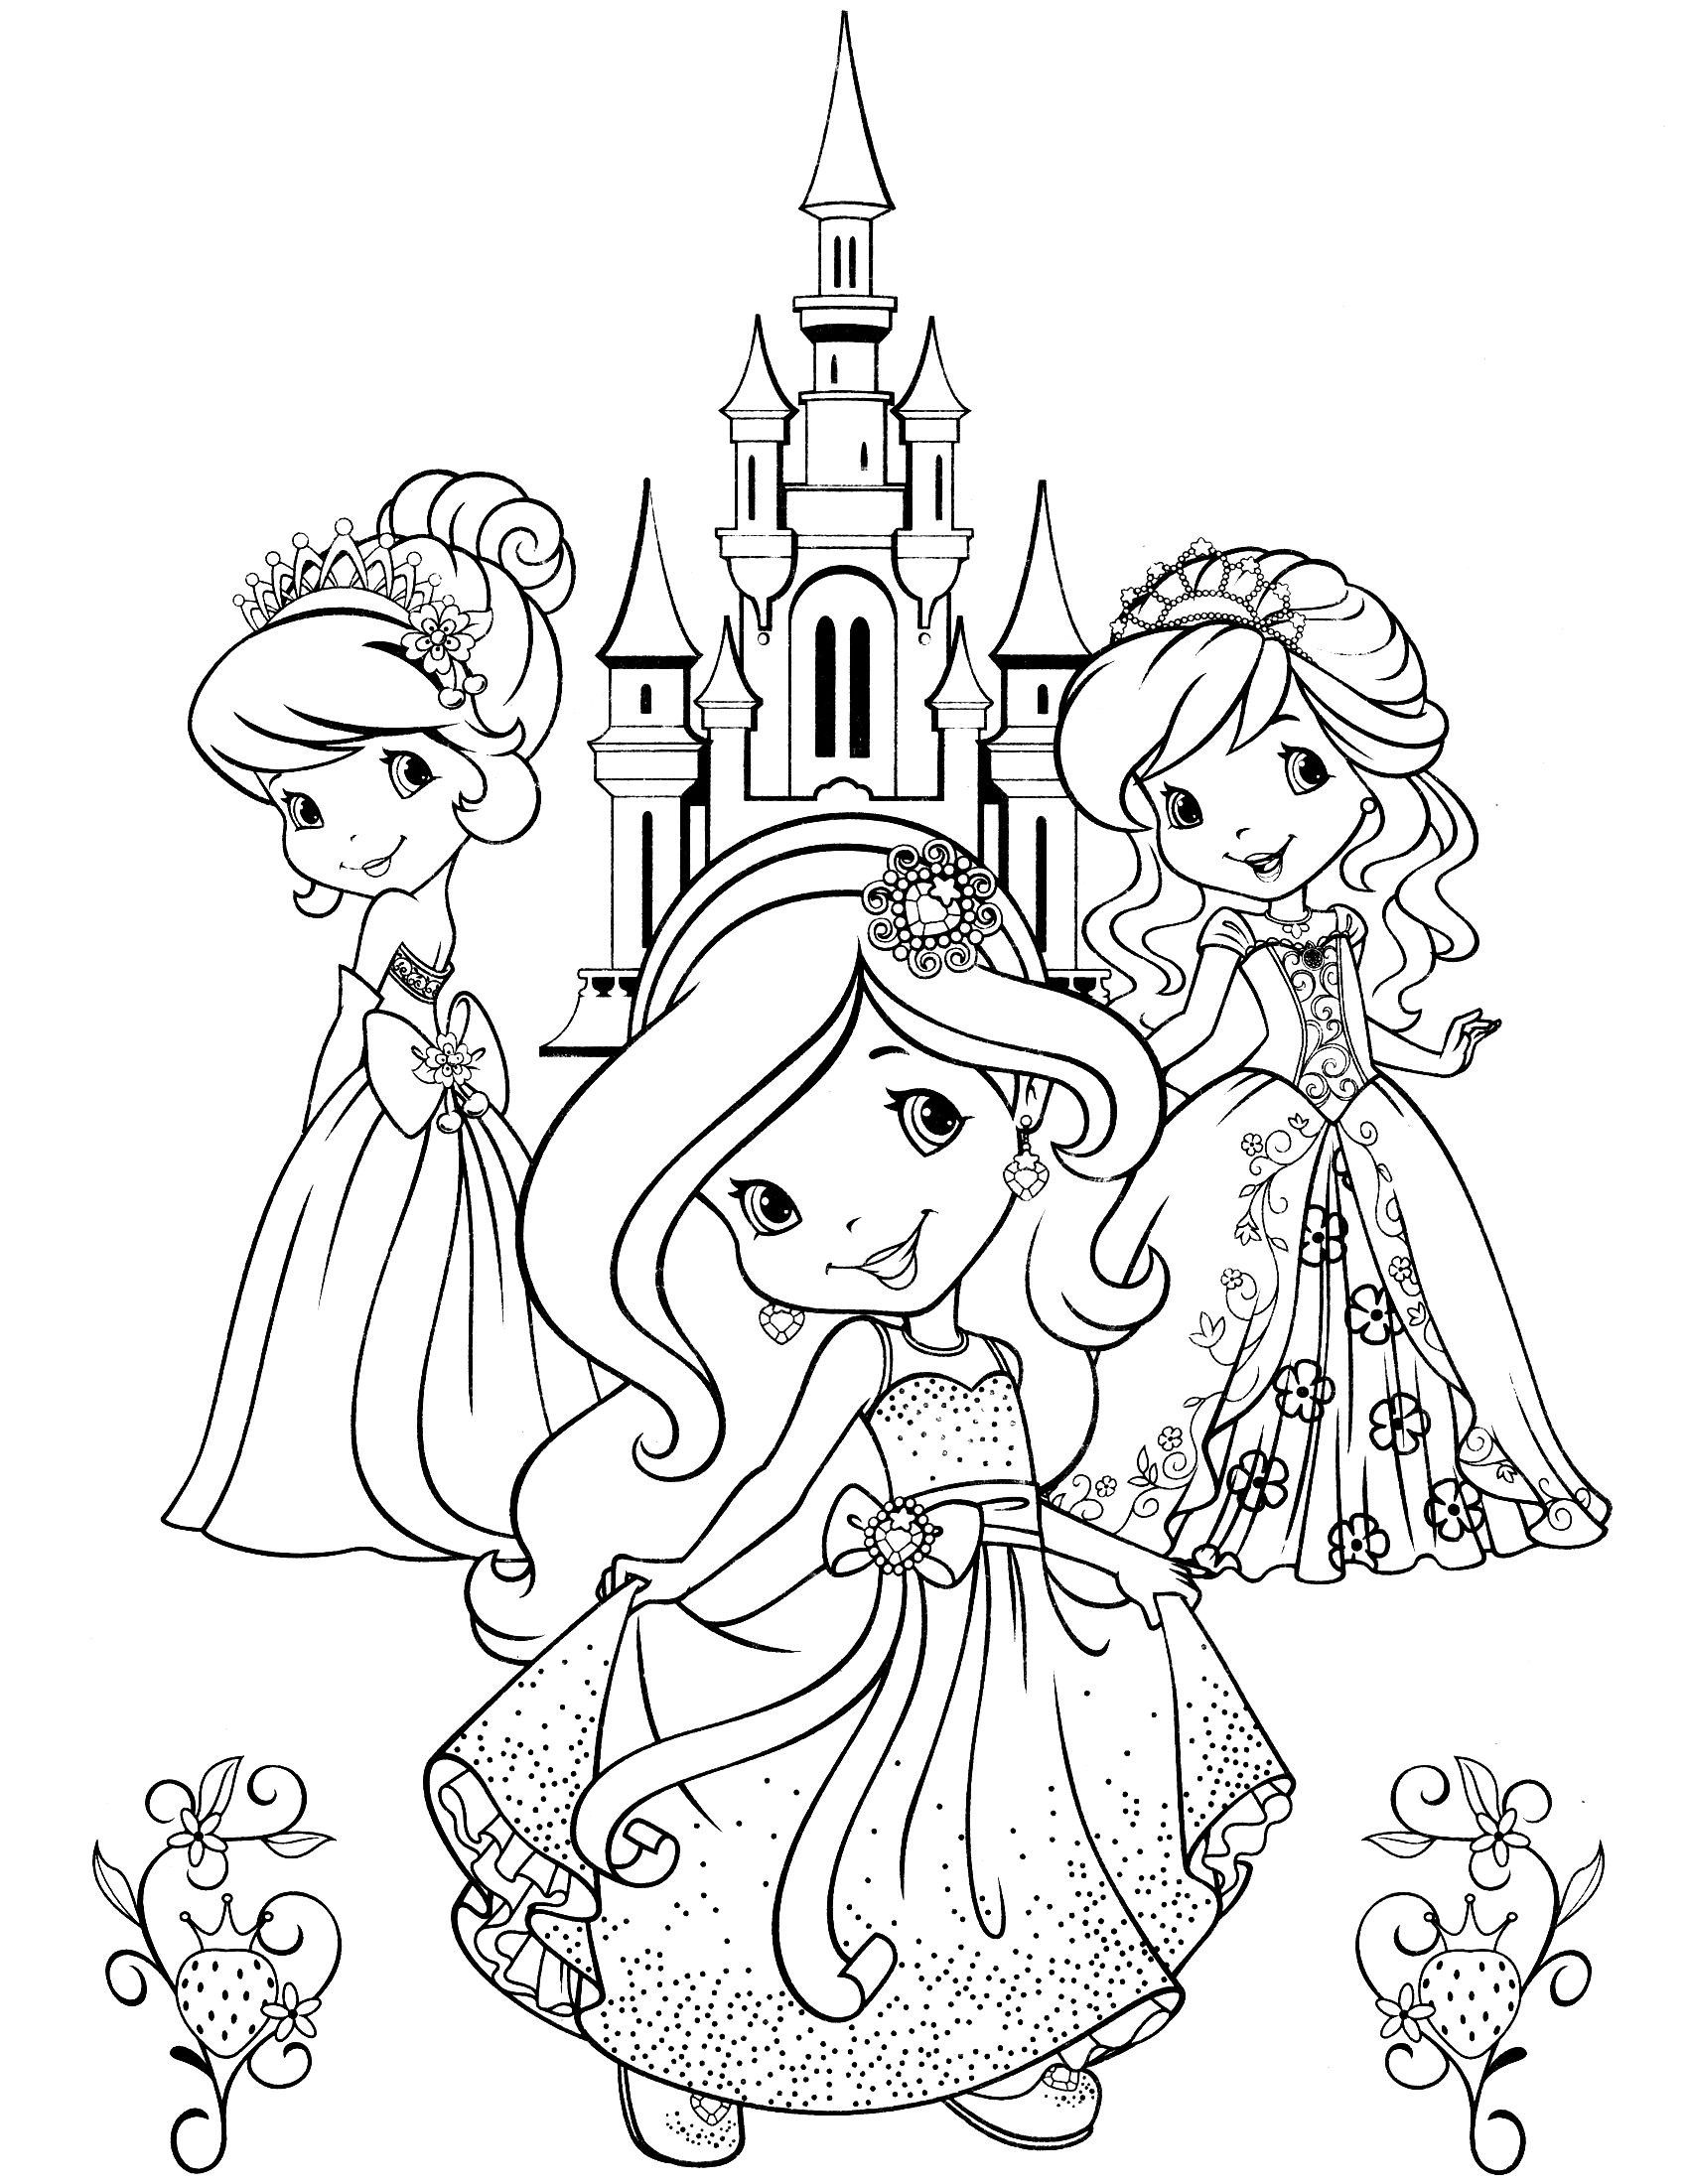 strawberry shortcake coloring page